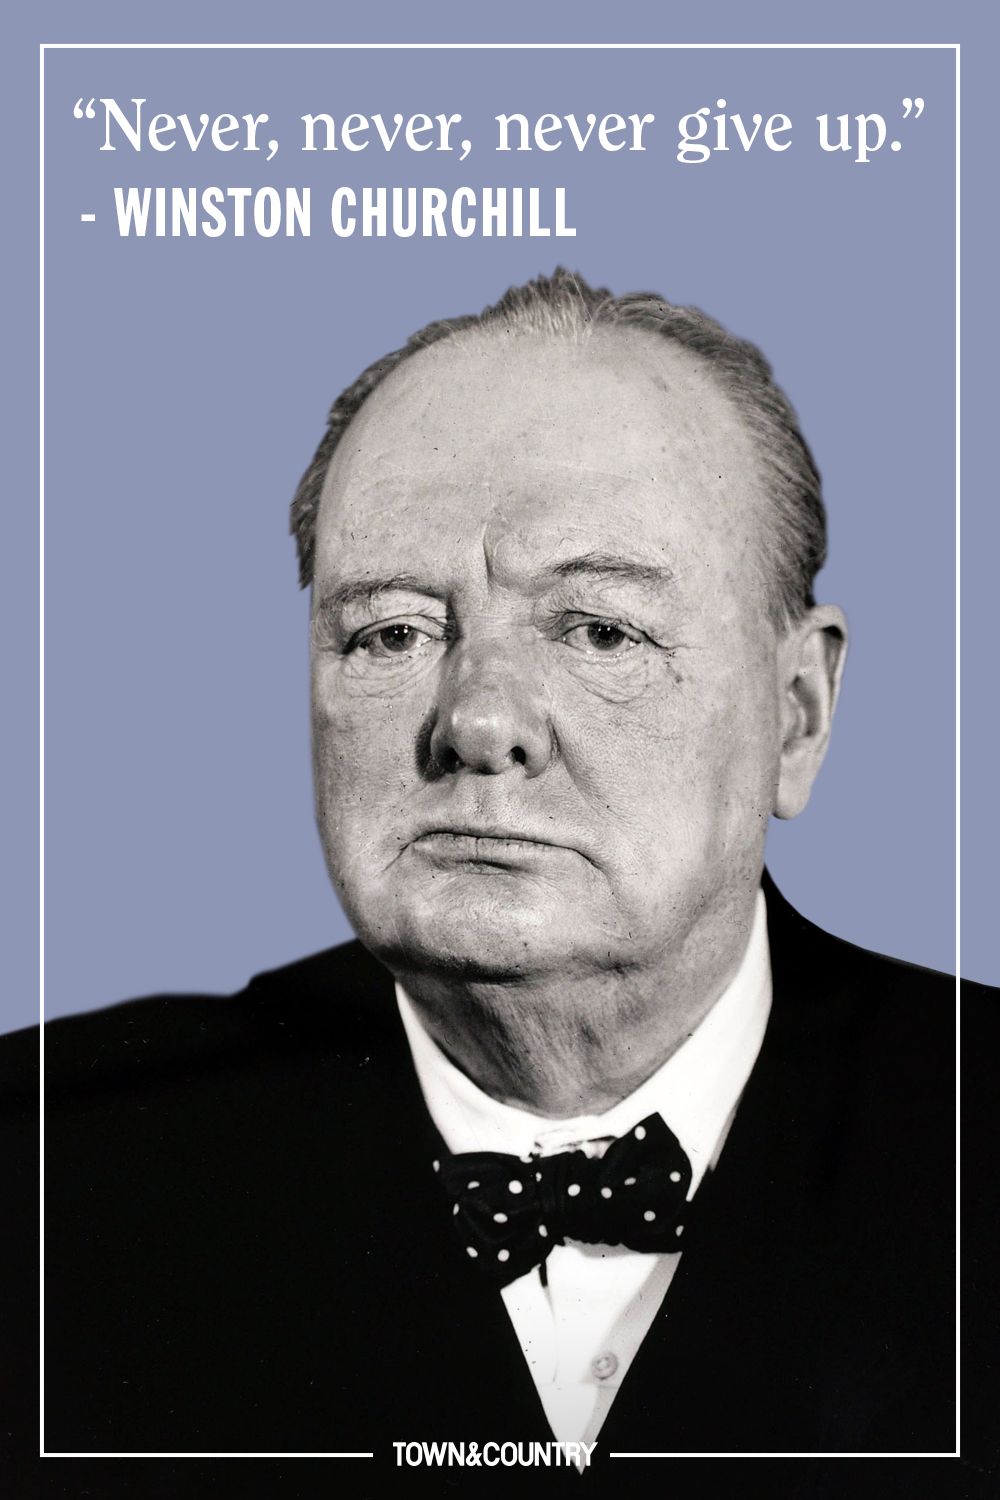 who was winston churchill known for